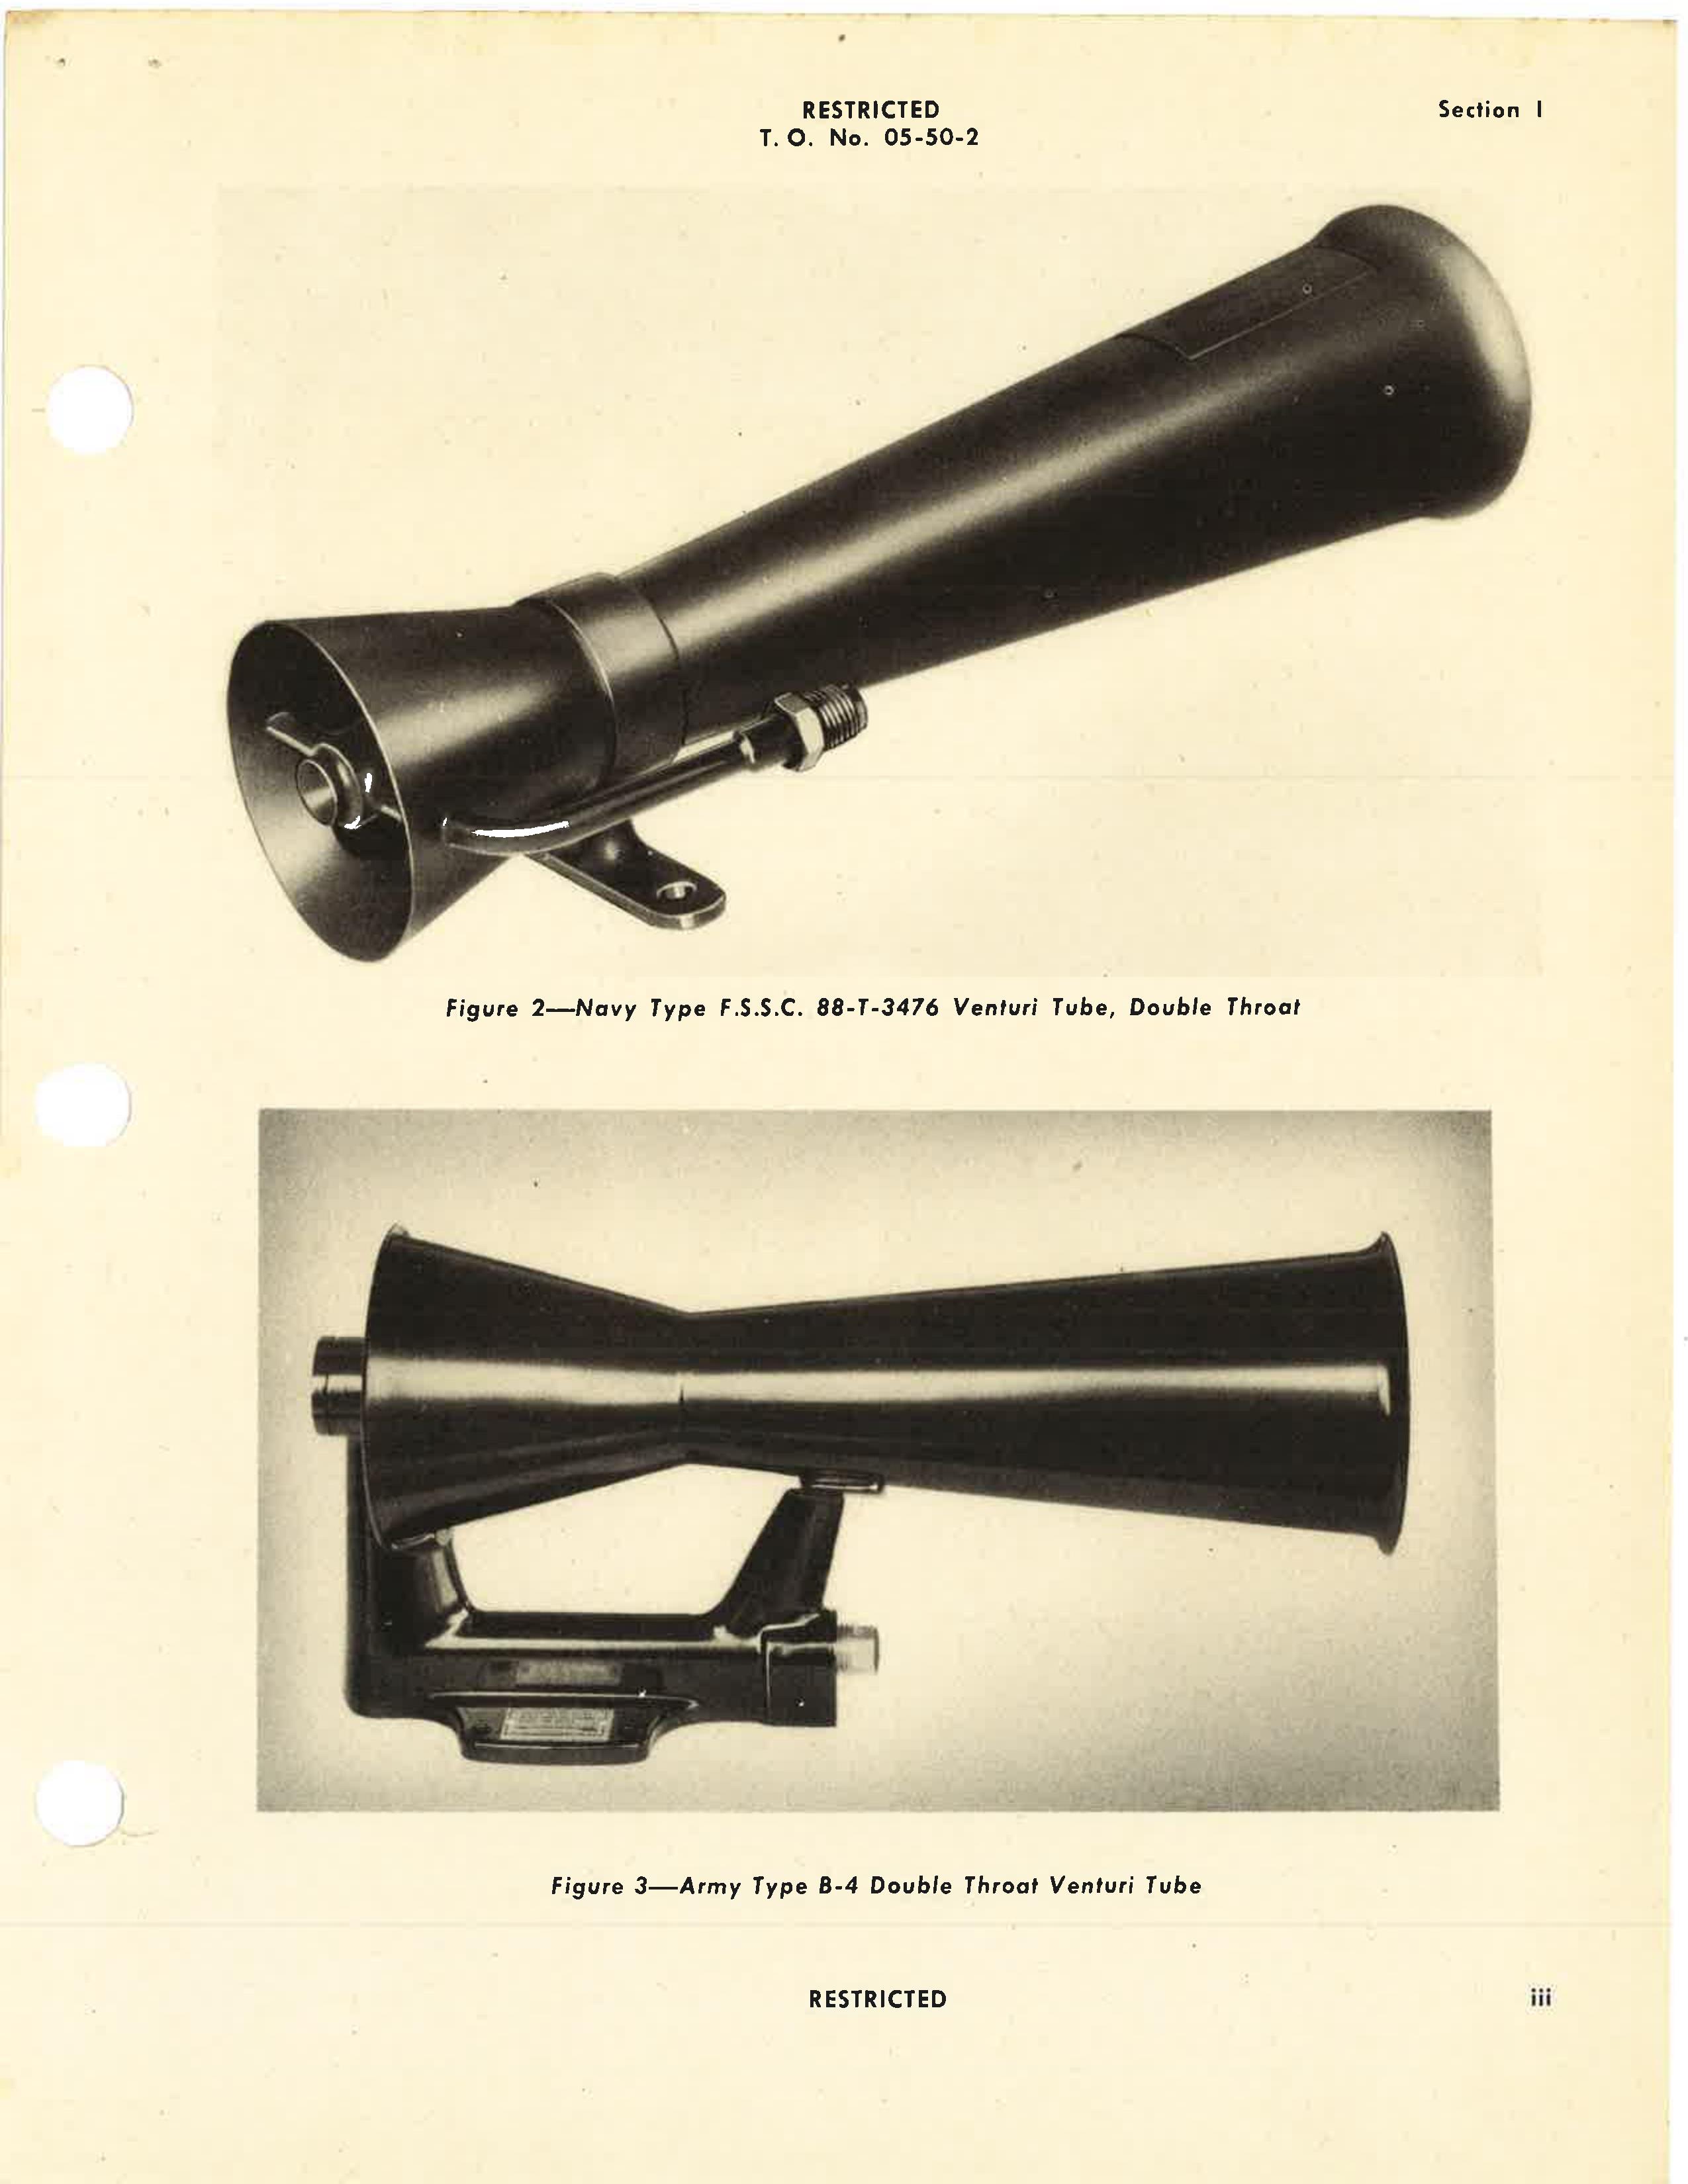 Sample page 5 from AirCorps Library document: Handbook of Instructions with Parts Catalog for Types A-3, A-3A and B-4, Power Veturi Tubes